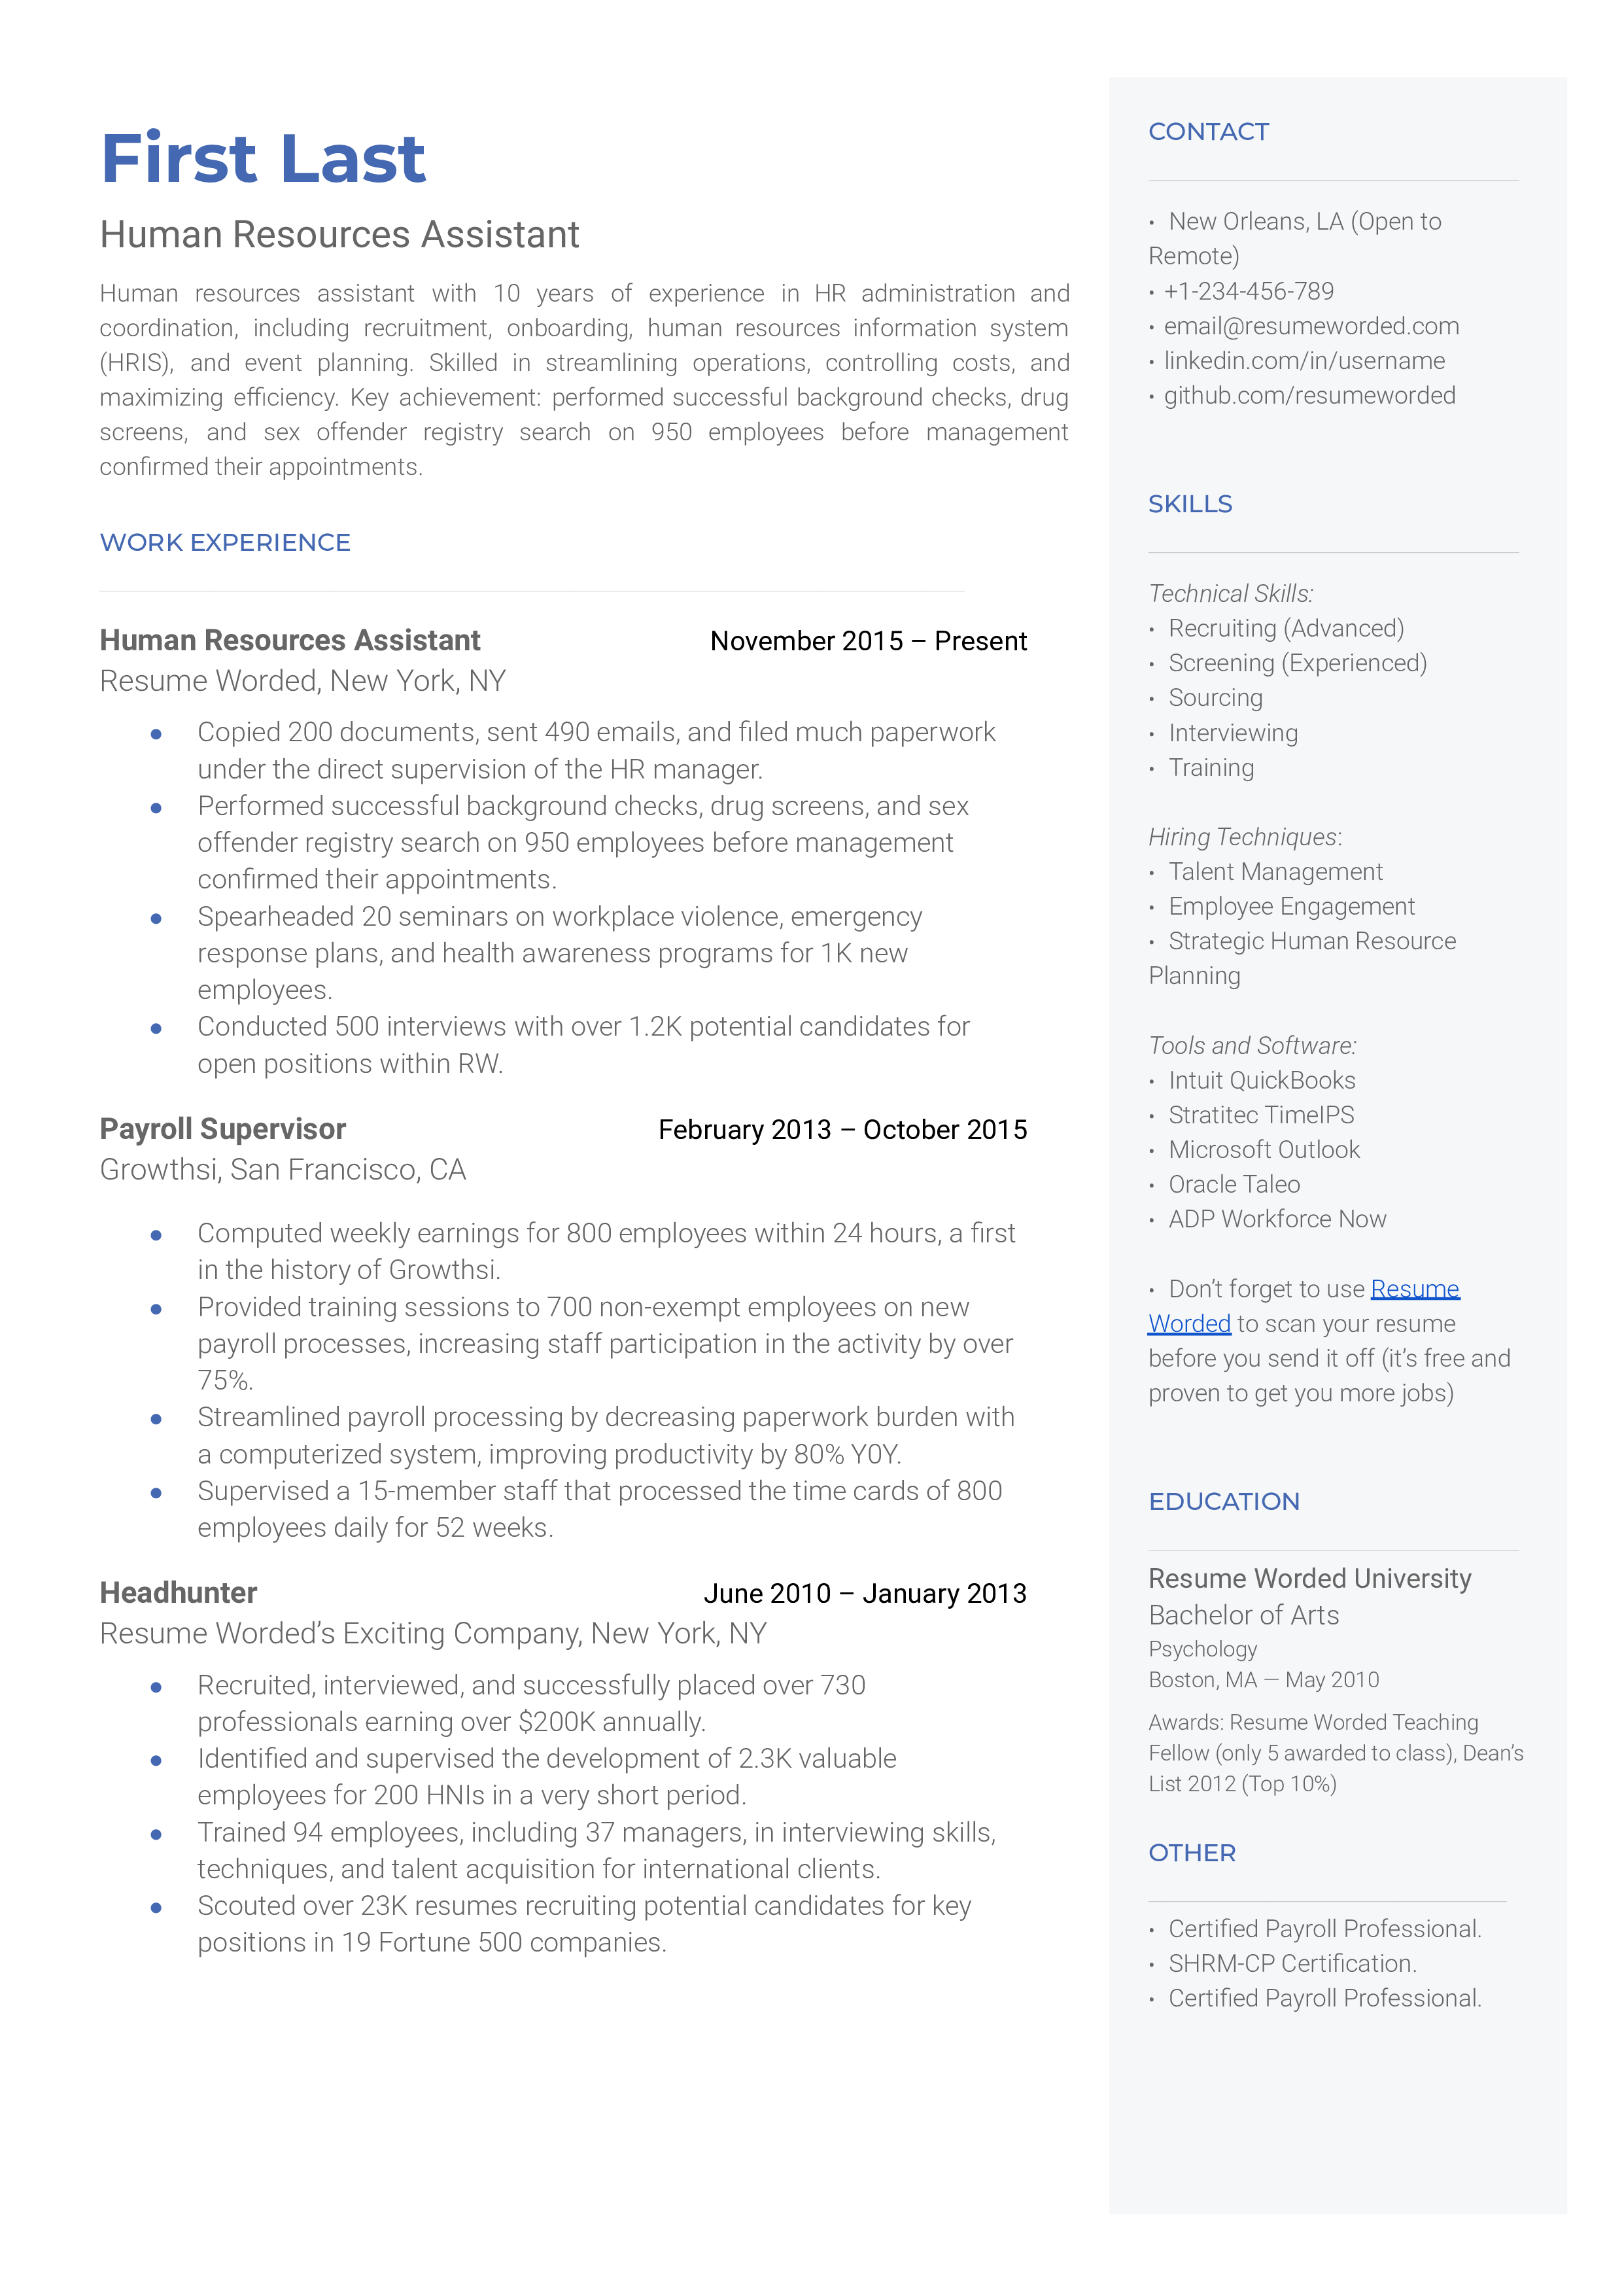 A CV screenshot showcasing skills and experiences relevant for Human Resources Assistant roles.